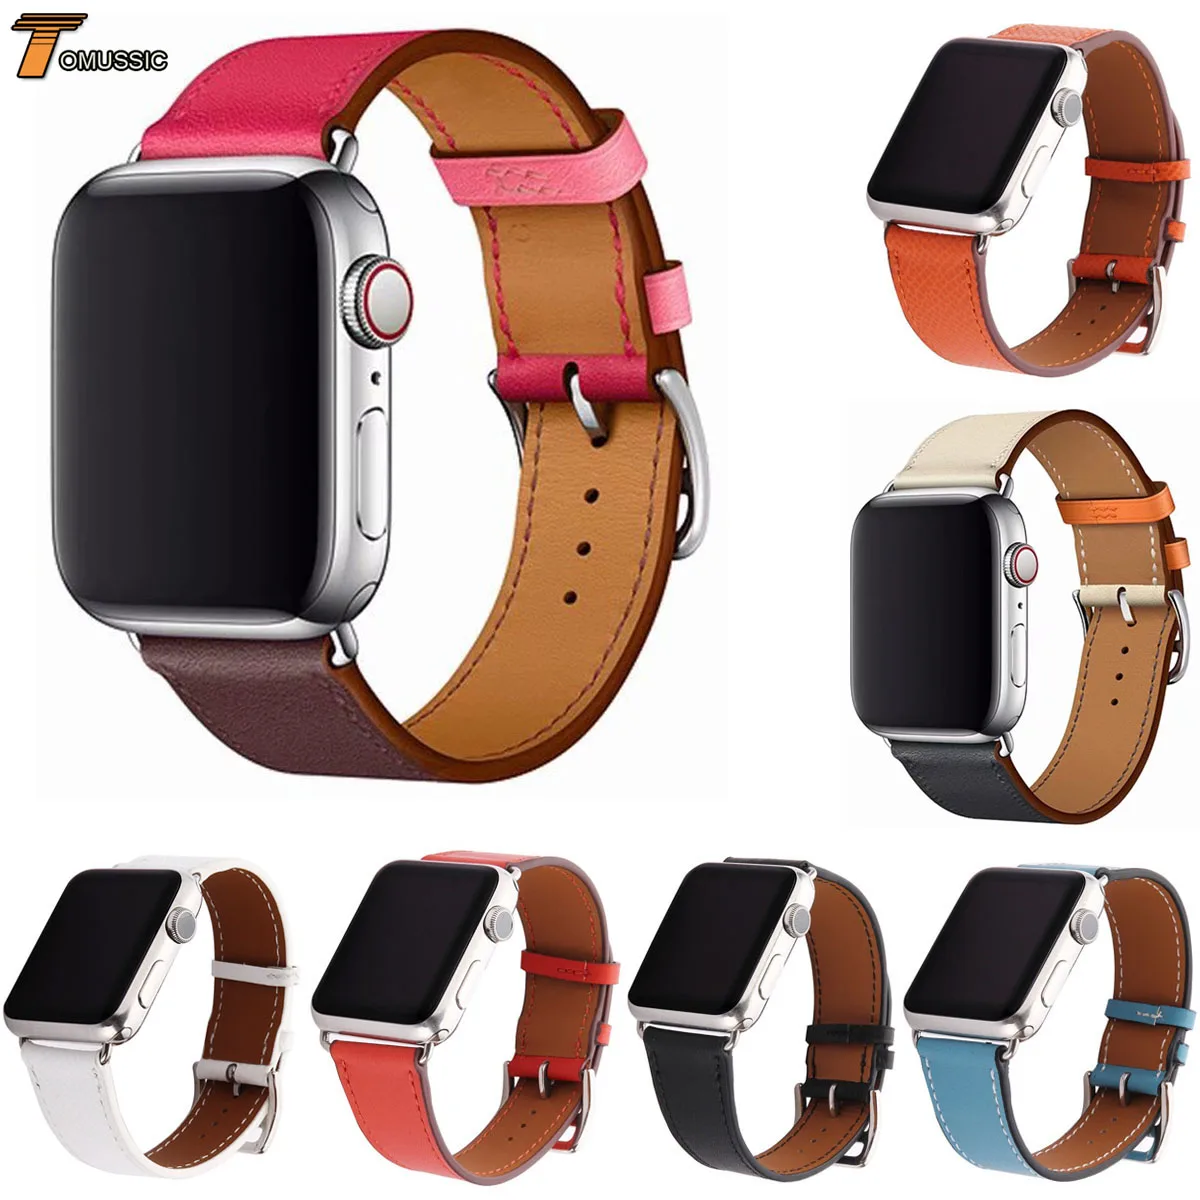 Buy 2018 New Single Tour Band for Apple Watch Series 4 3 2 1 Genuine Leather Strap iWatch 44mm 40mm 42mm 38mm Wrist on